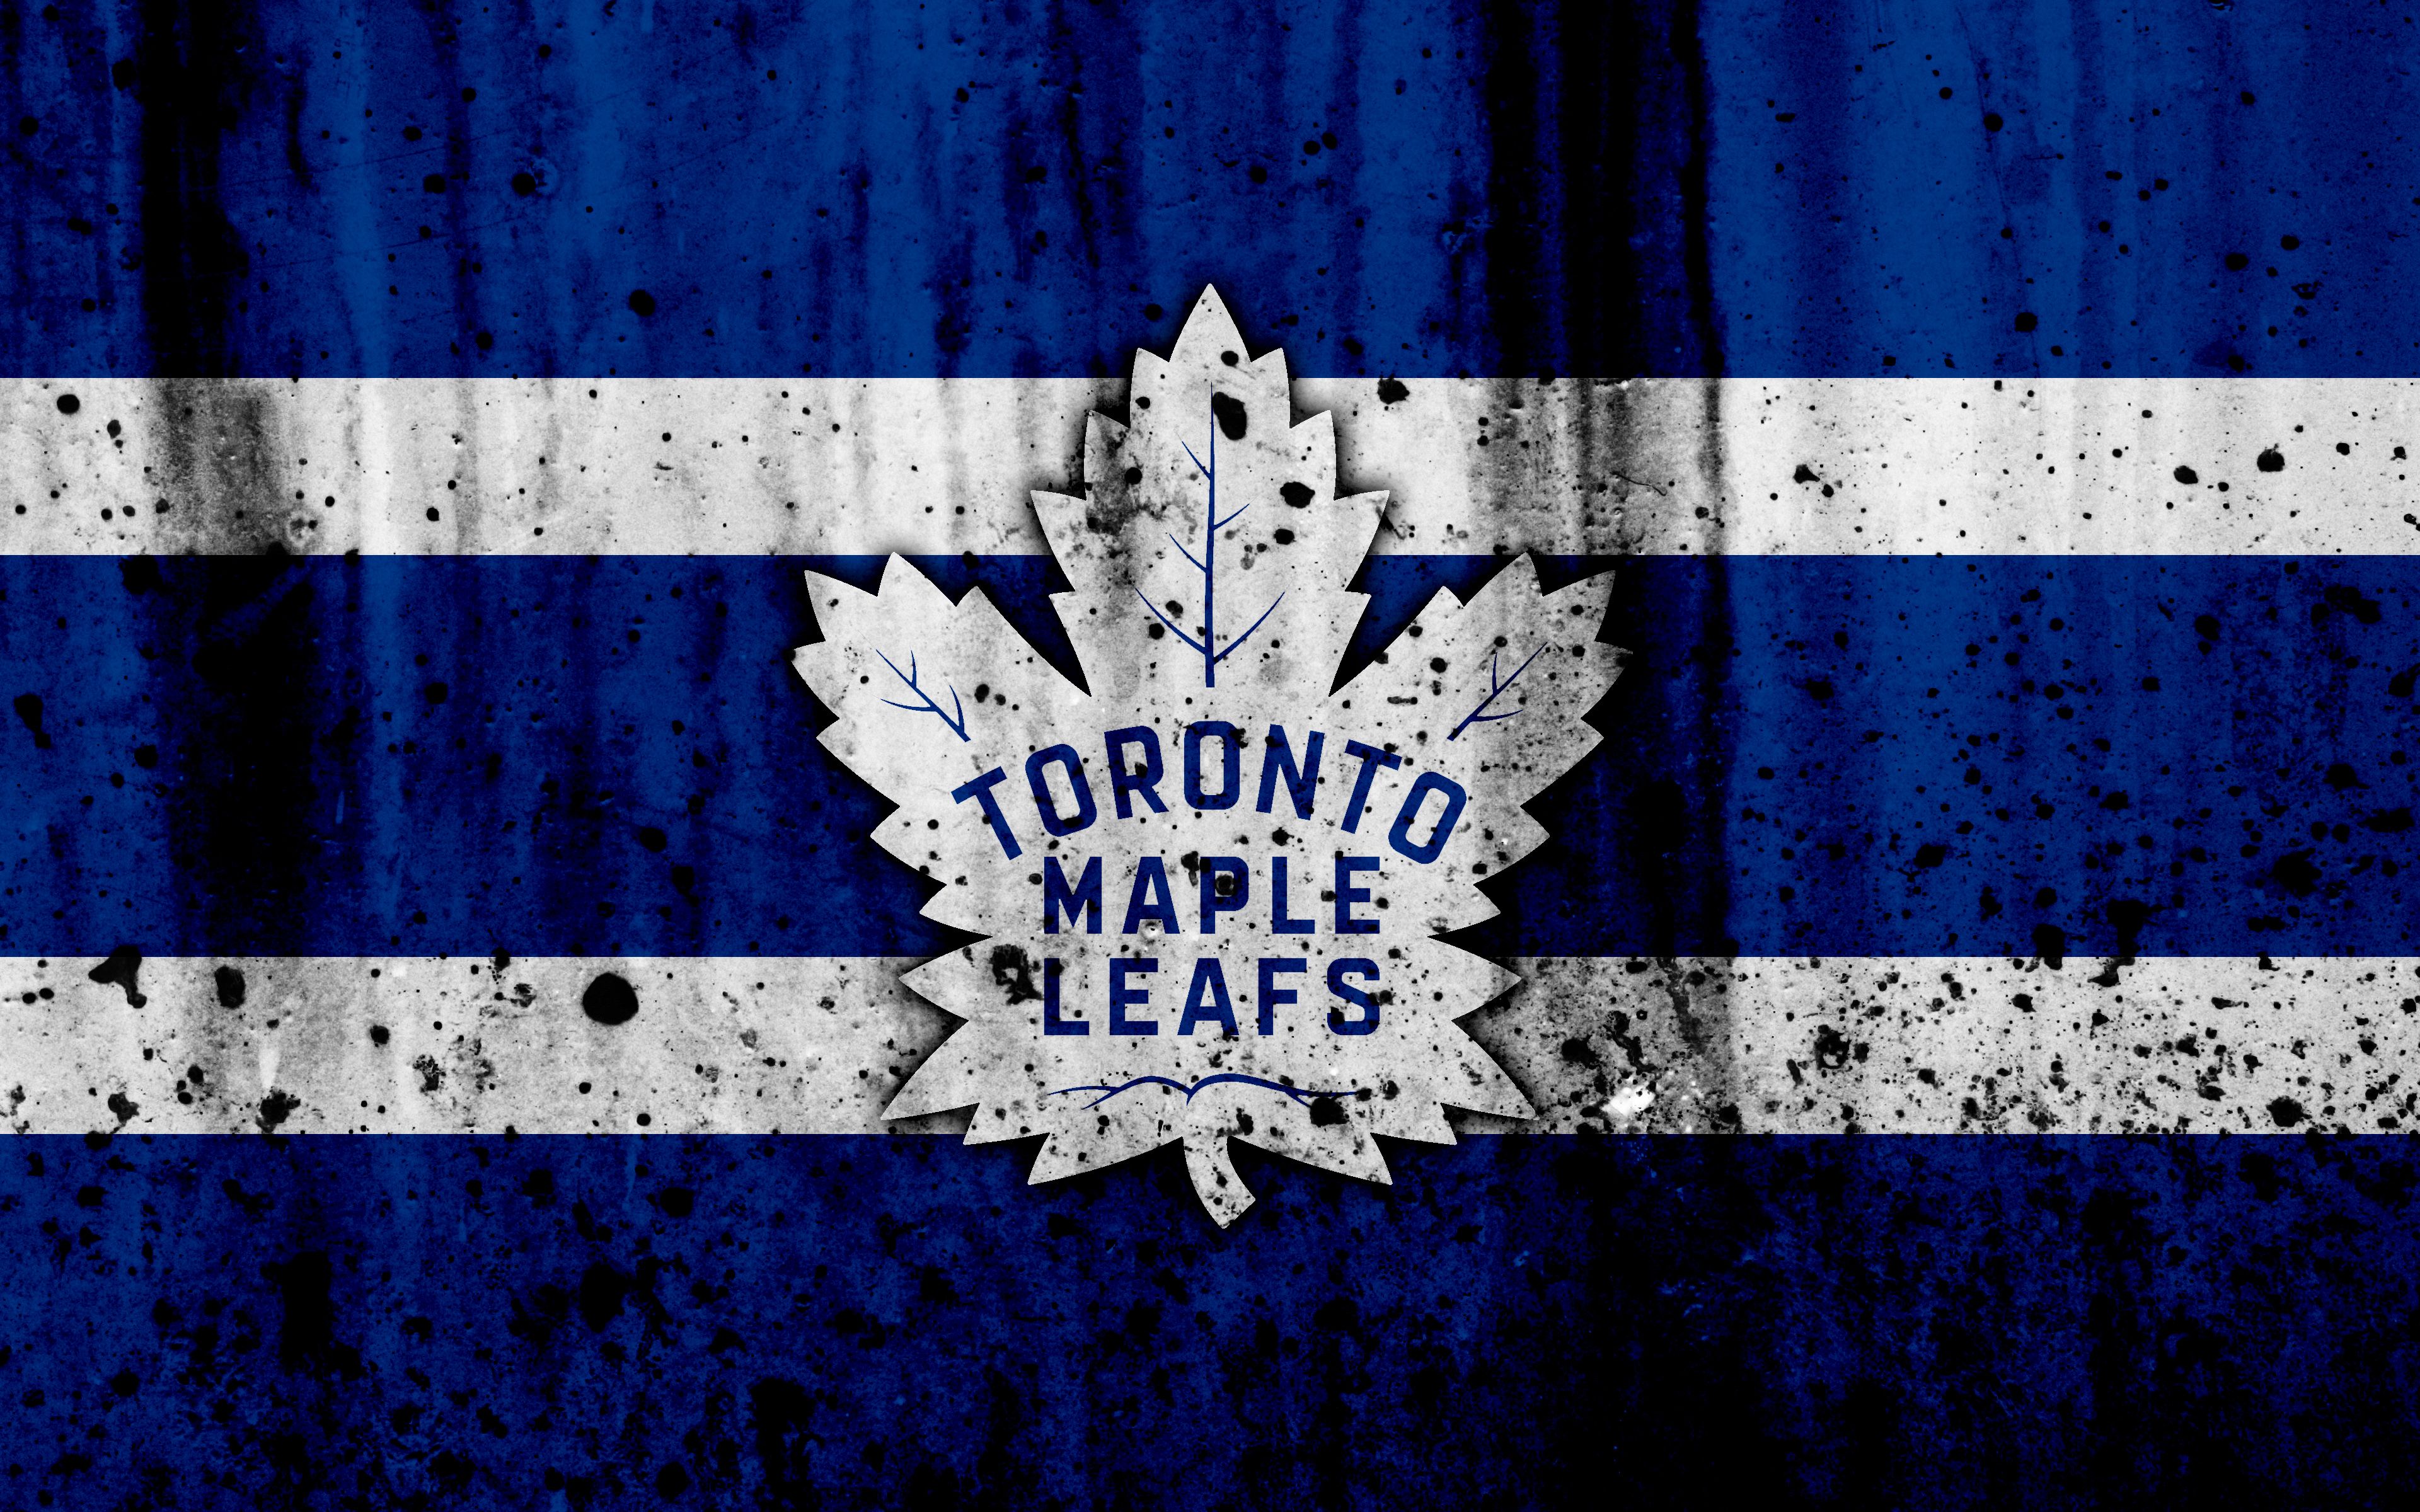 Toronto Maple Leafs 2018 Wallpaper 69 pictures